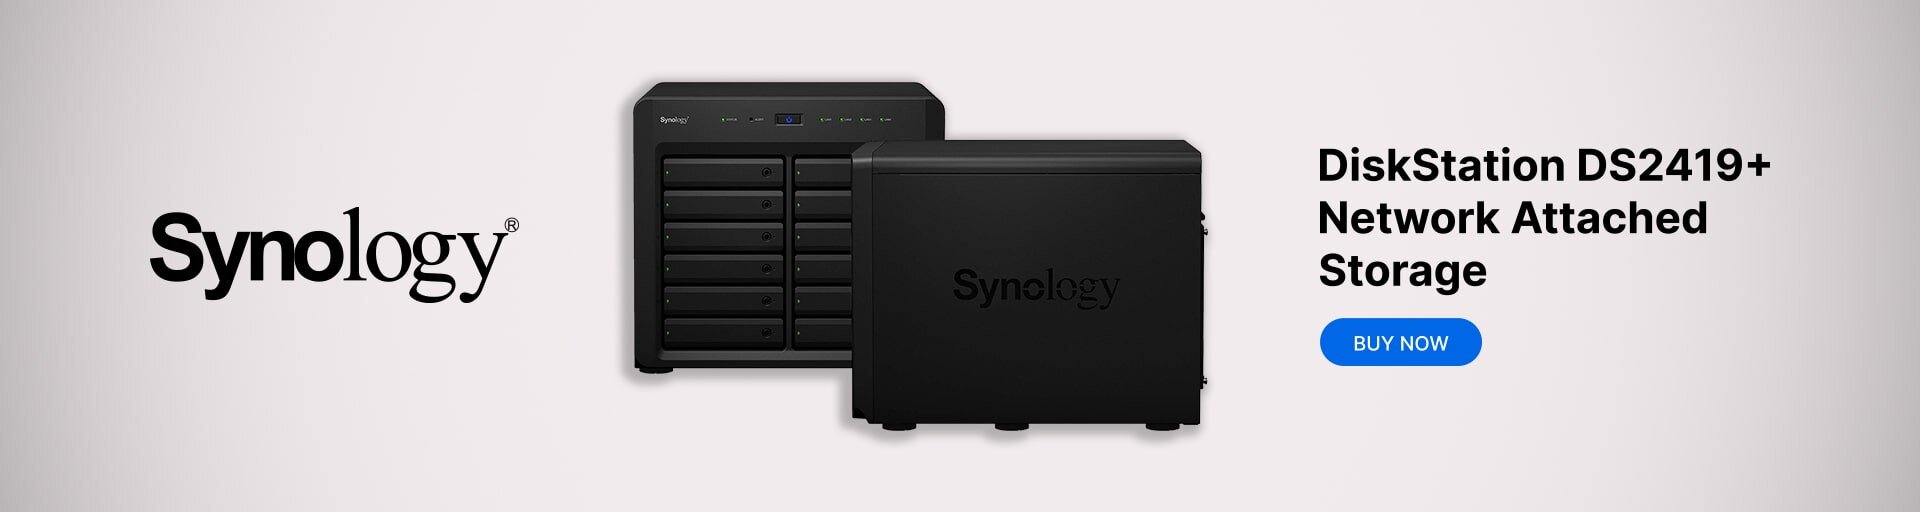 Synology DiskStation DS2419+ Network Attached Storage